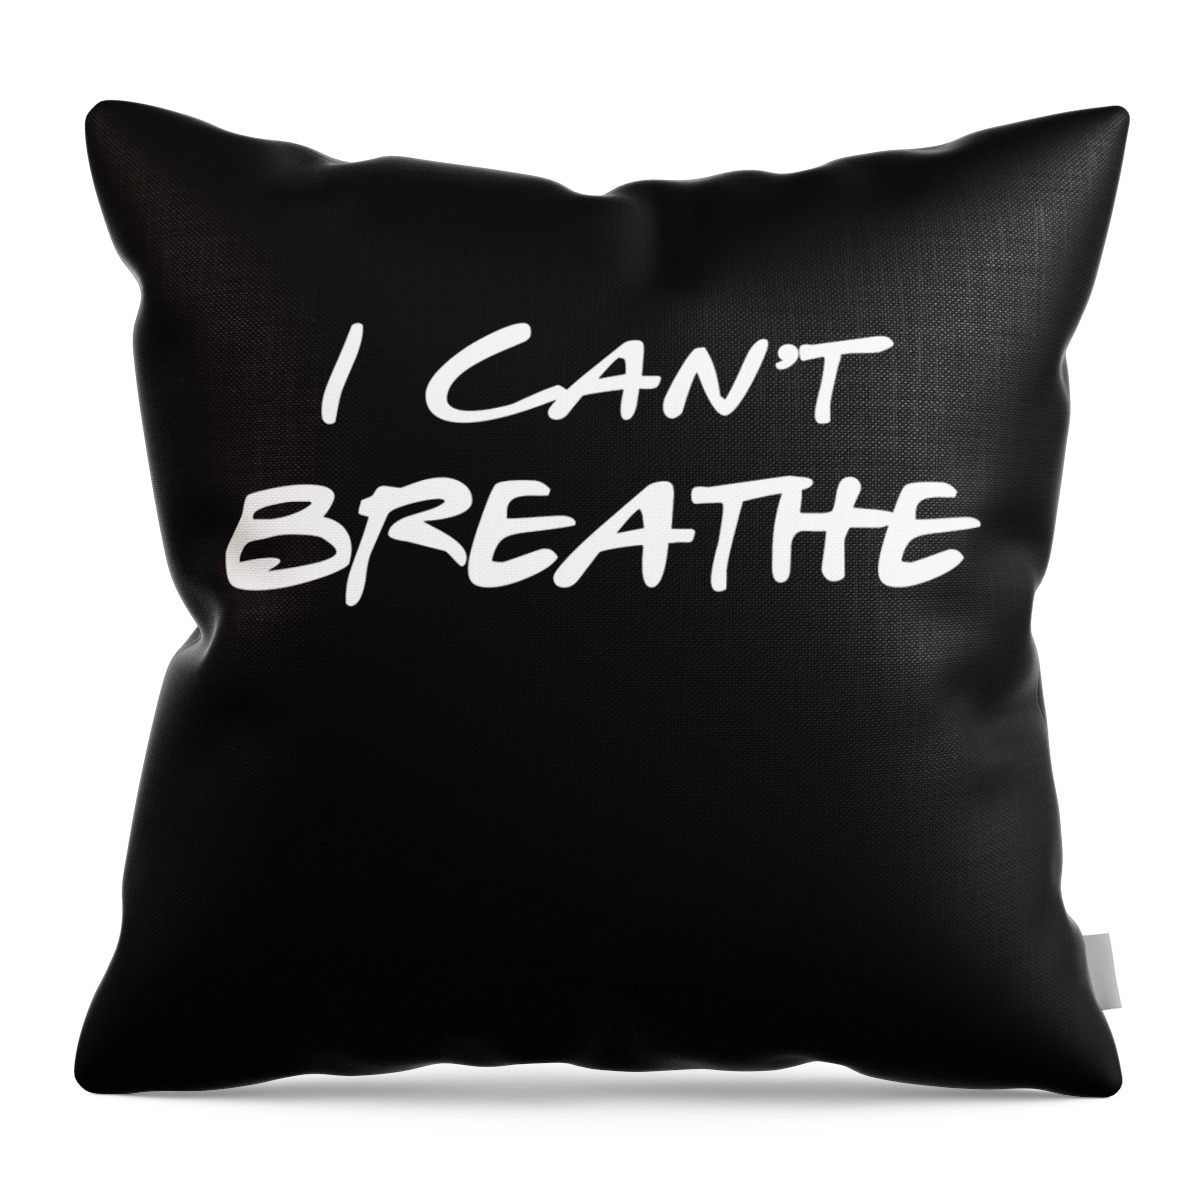 Cool Throw Pillow featuring the digital art I Cant Breathe BLM by Flippin Sweet Gear